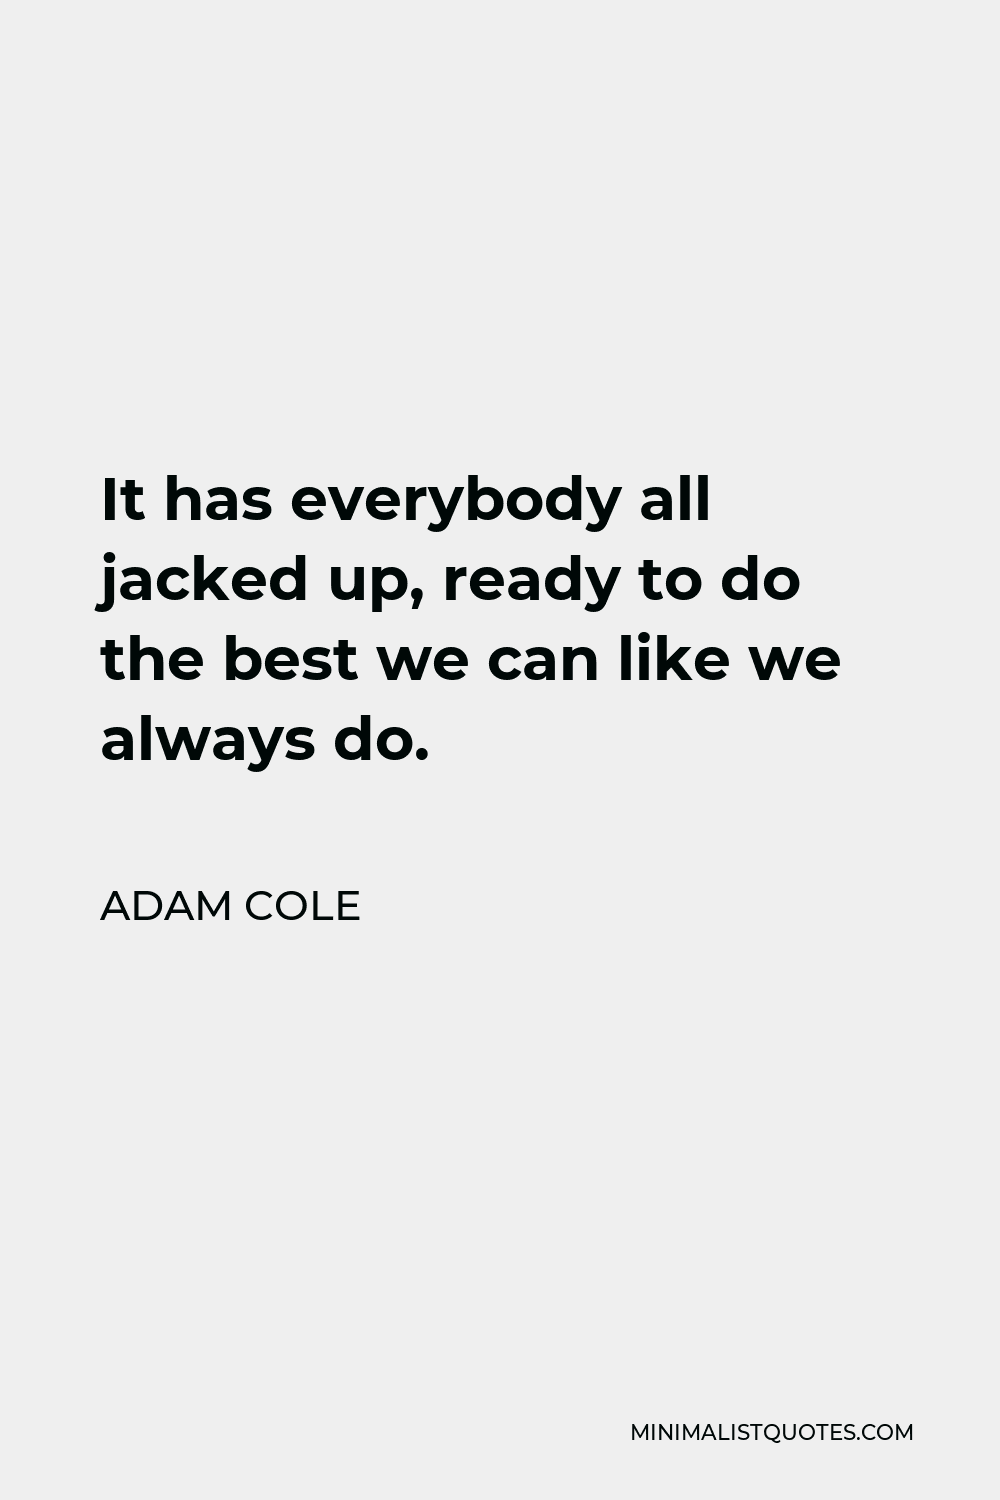 Adam Cole Quote - It has everybody all jacked up, ready to do the best we can like we always do.